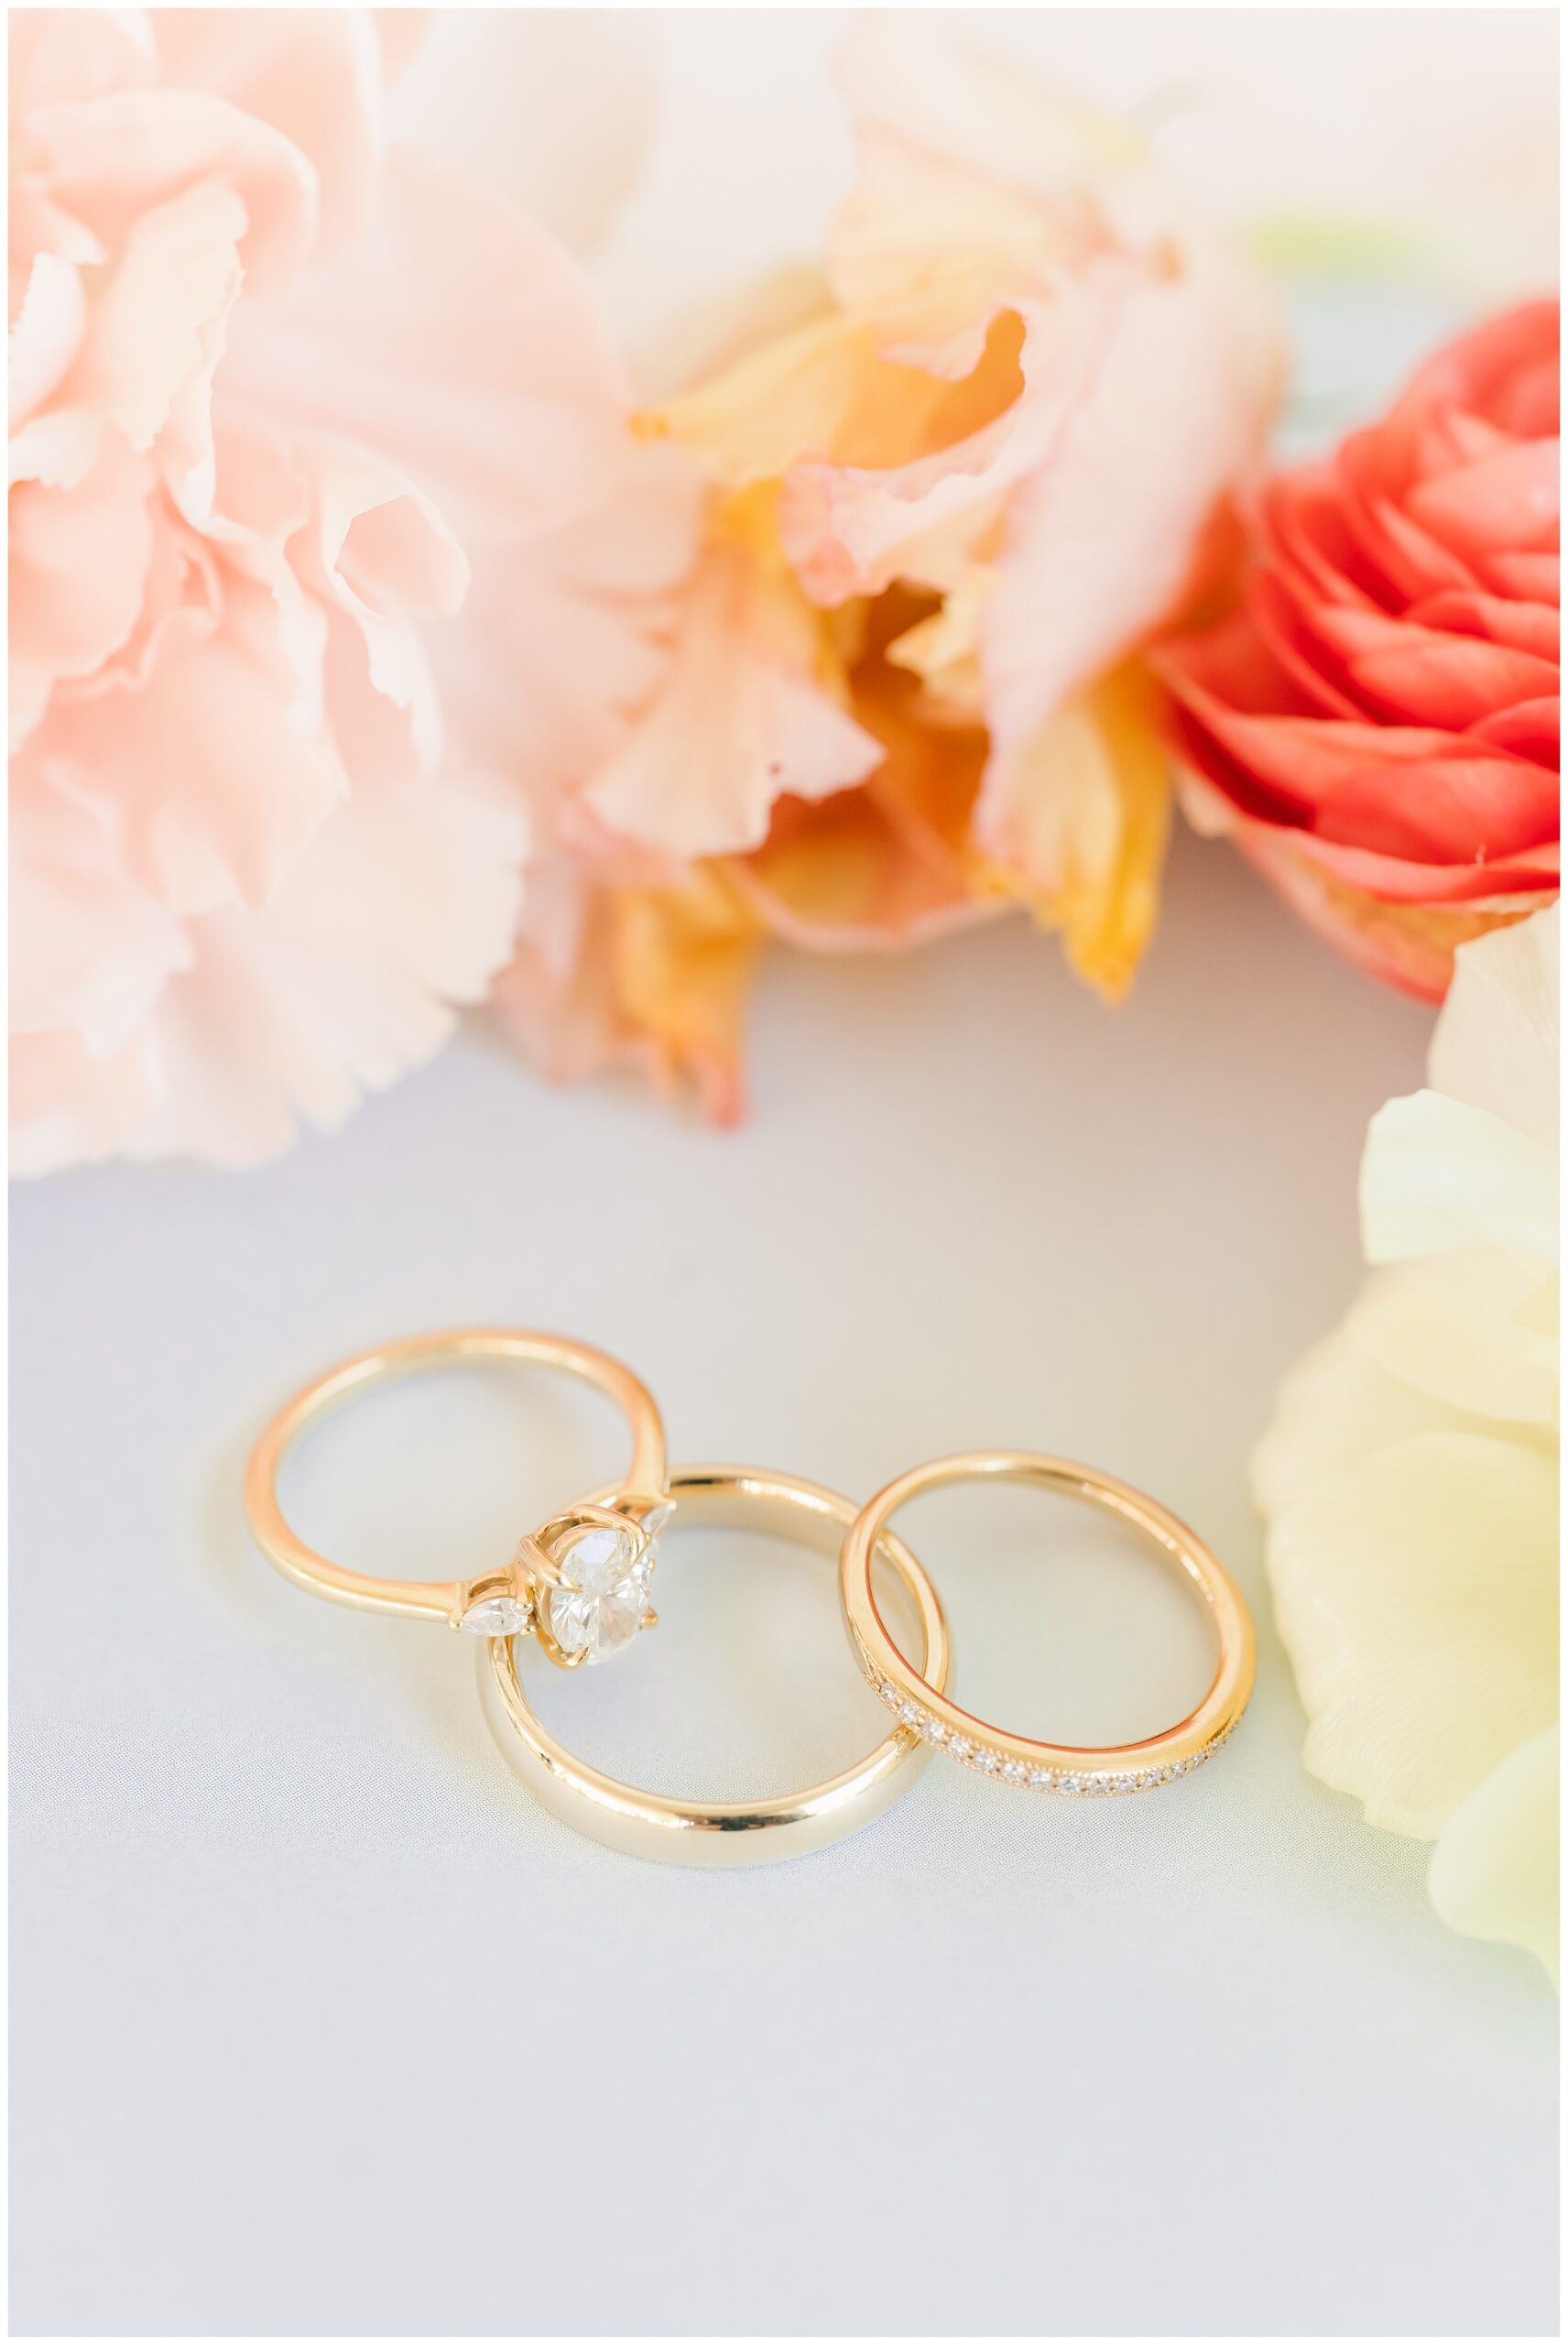 detail photo of gold wedding bands on coral flowers.